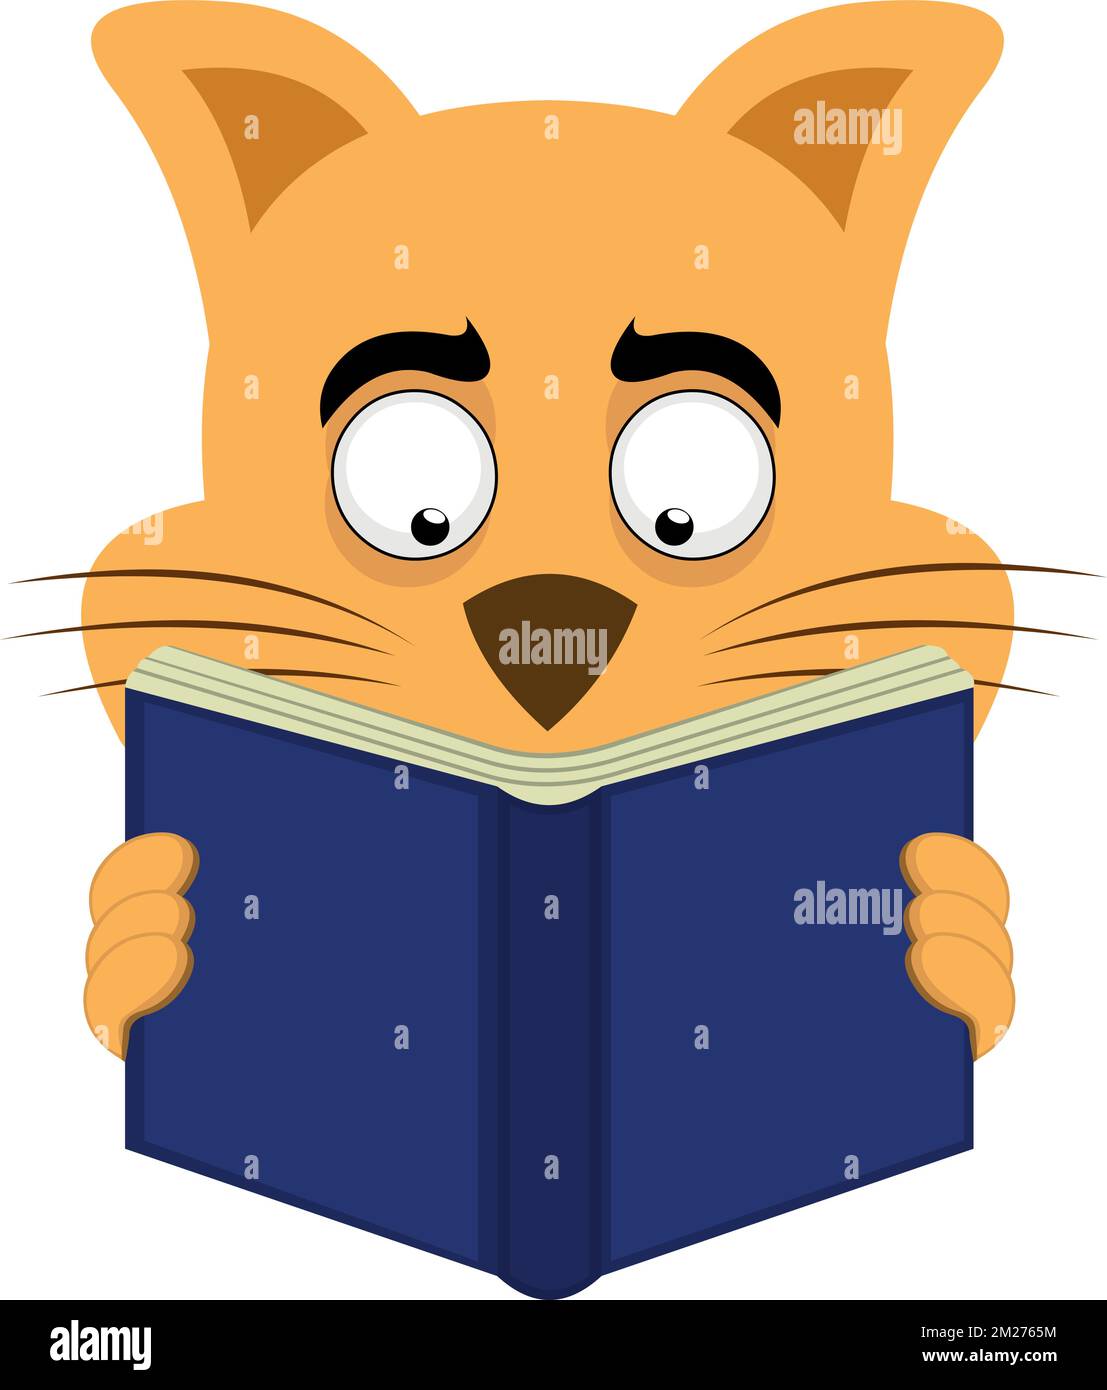 vector illustration of the face of a cartoon cat reading a book Stock Vector